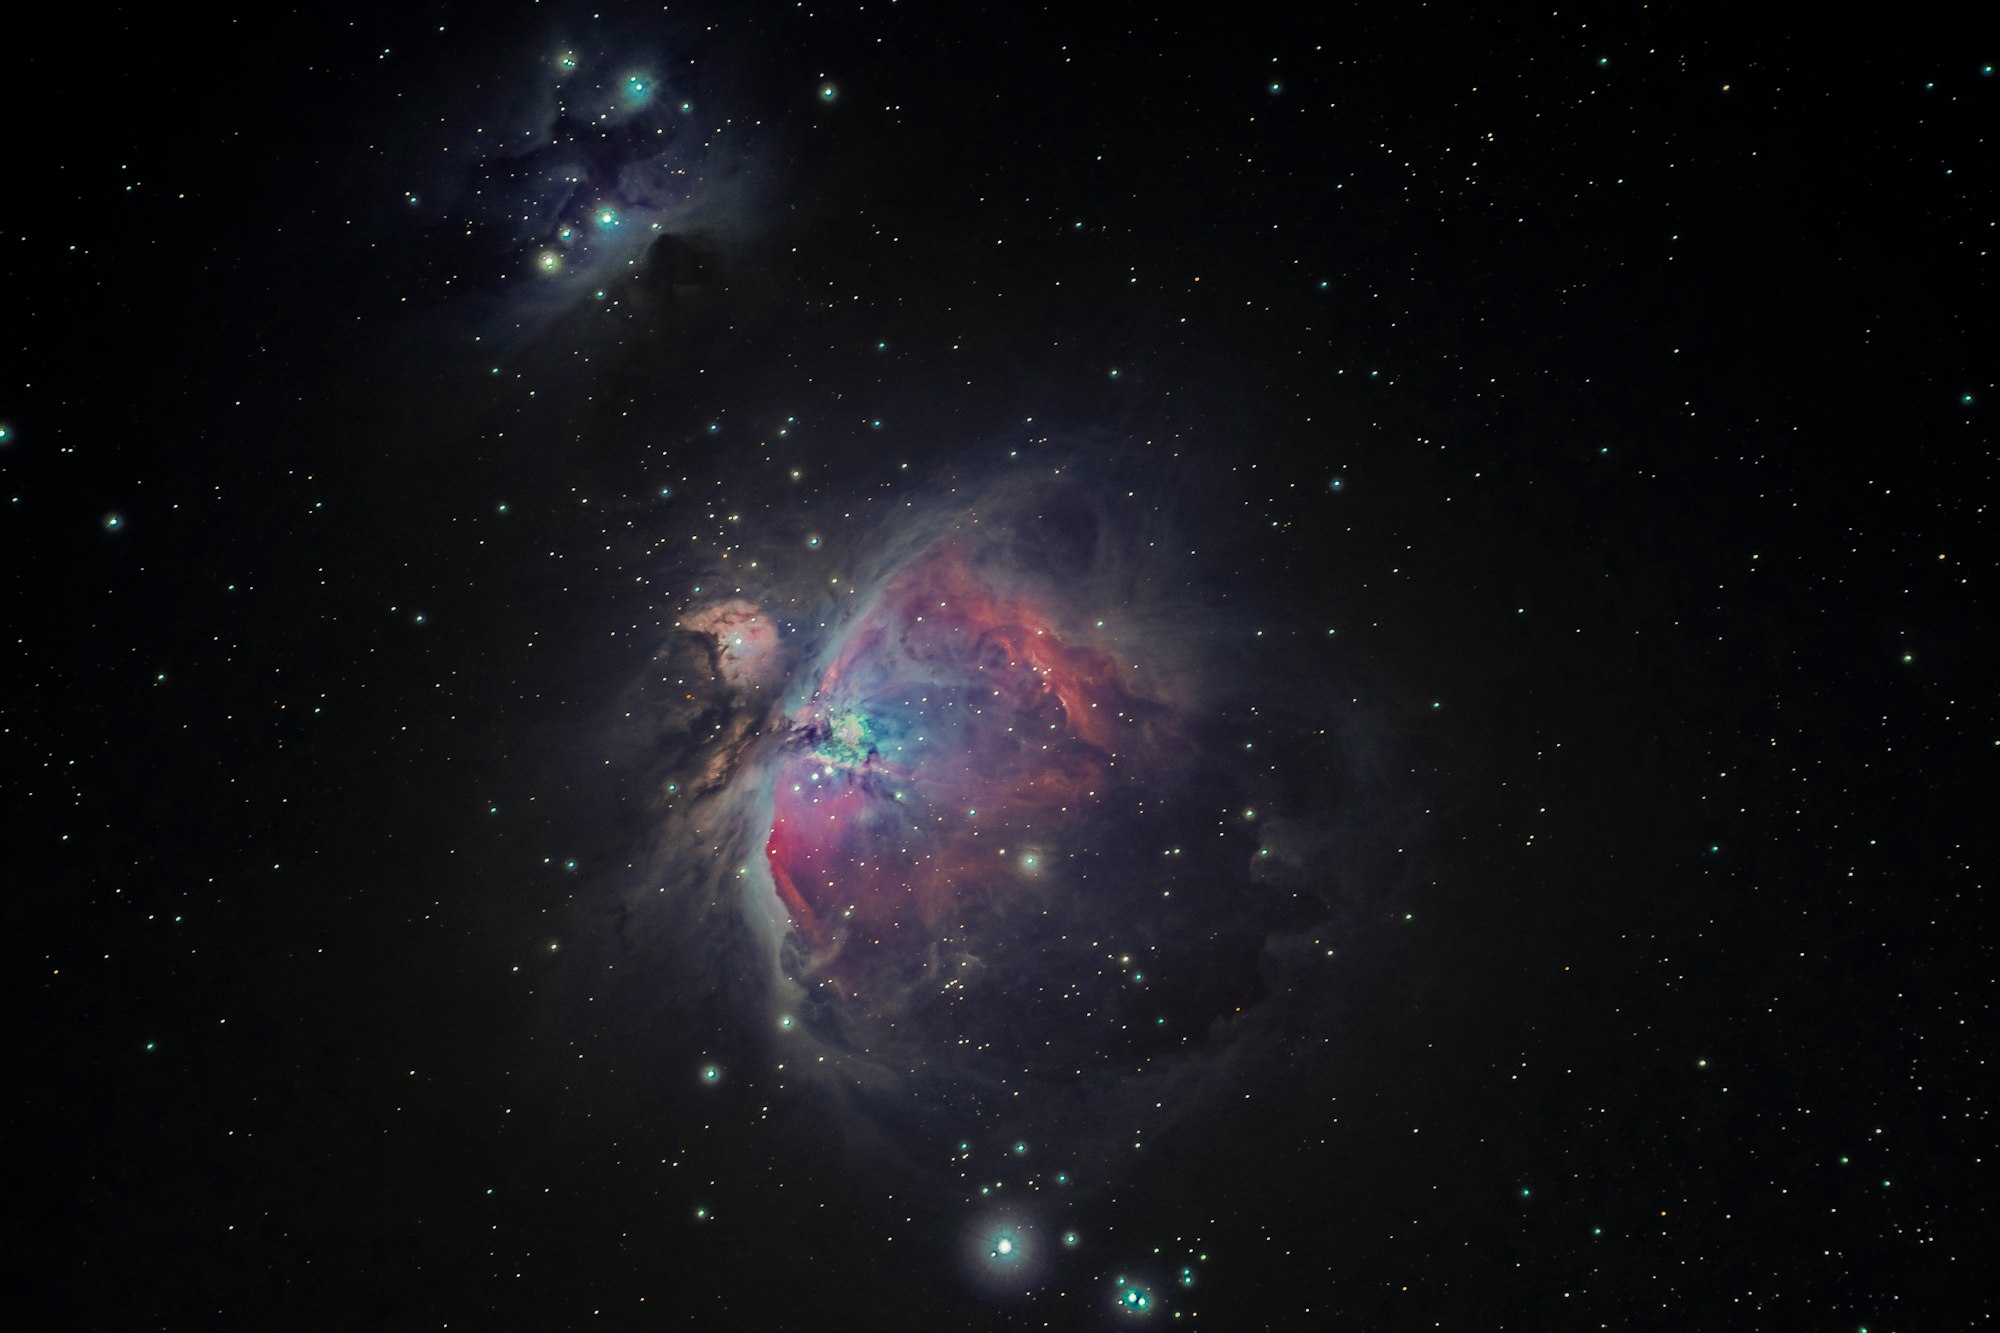 My photo of the Orion Nebula was taken in my backyard in Petaluma, California. It is composed of 60 images at 60 seconds each. I stacked them all to reduce noise and bring out the amazing details you see in the nebula . I think it is one of my better images. I hope you enjoy it. I’m on IG @bryangoffphoto Stop by and say hi!